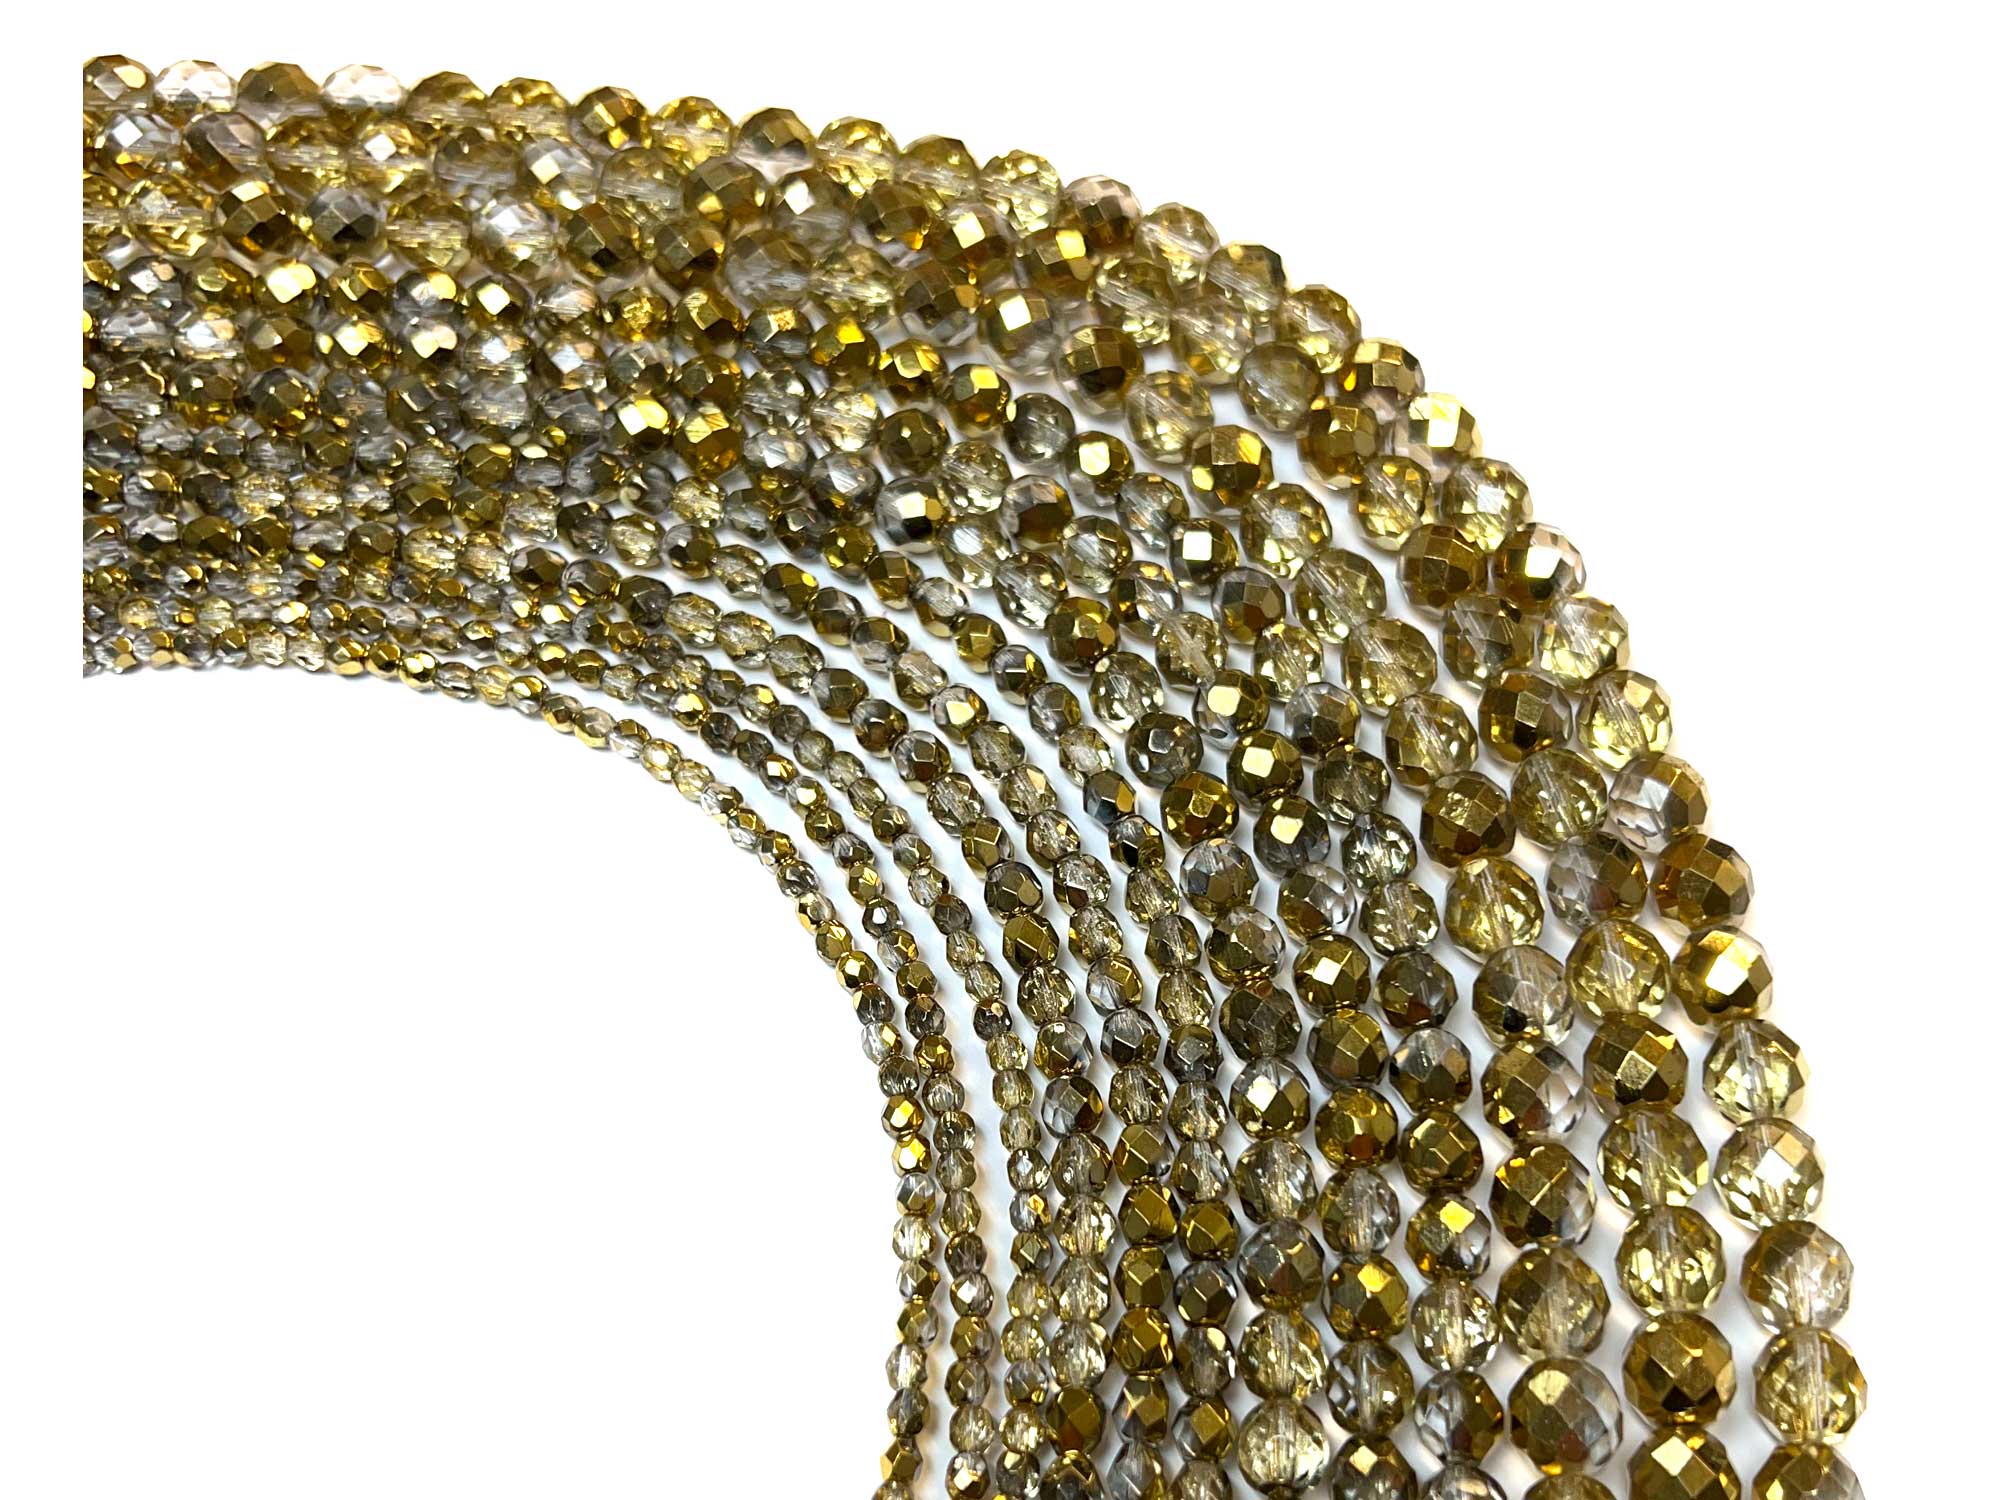 Crystal Amber 2-sided Gold coated, Czech Fire Polished Round Faceted Glass Beads, 16 inch strand